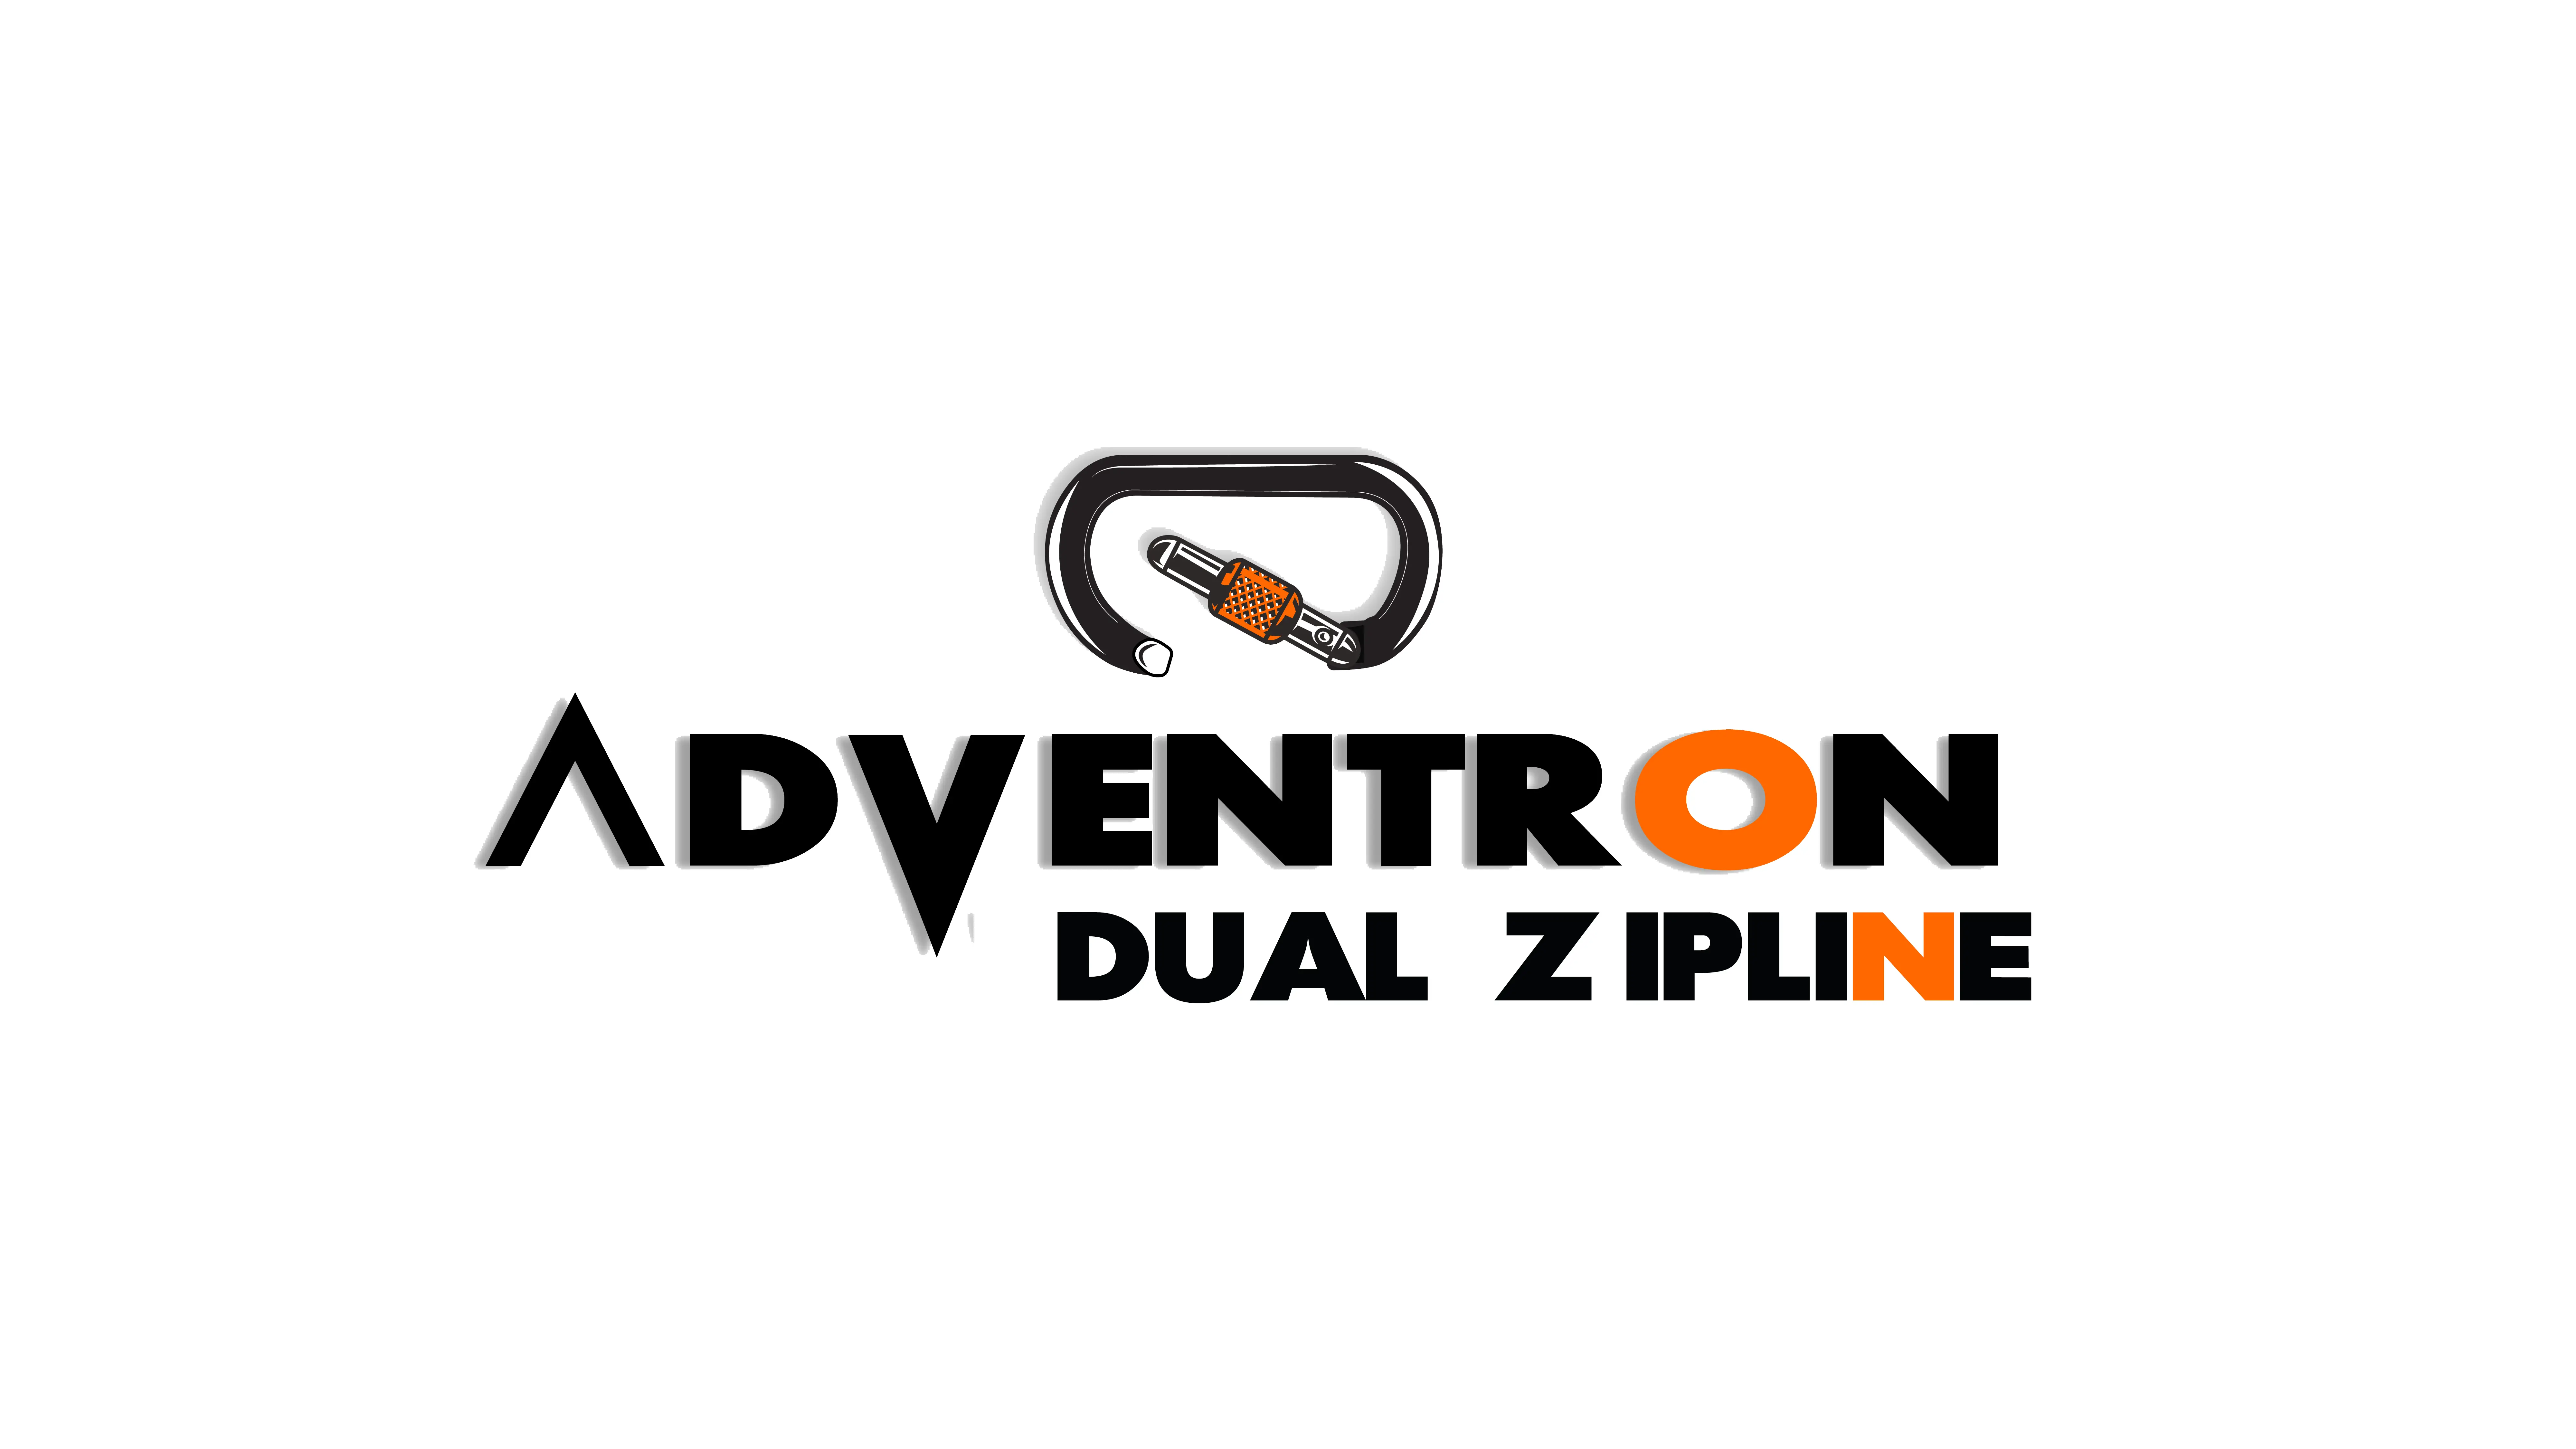 Discover the Thrill of Adventron Dual Zipline: Now Easily Accessible on Google Maps!